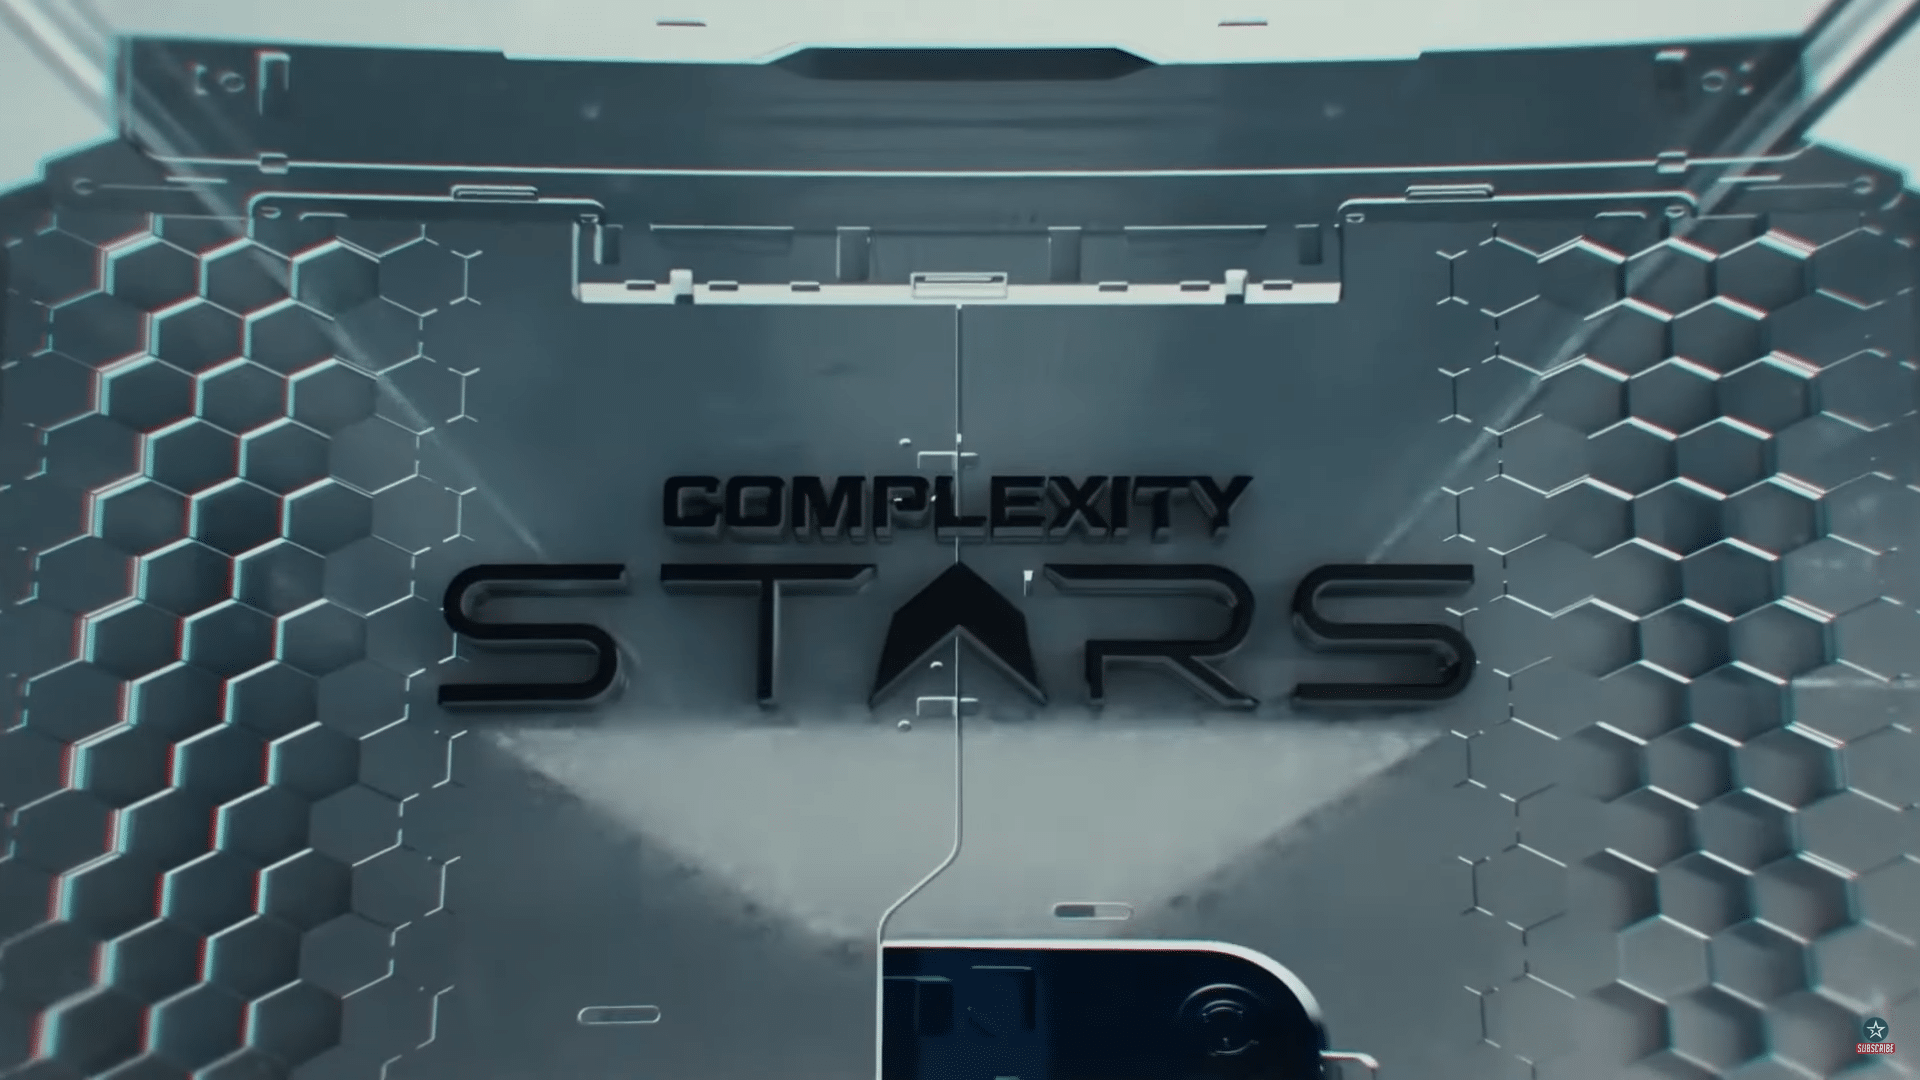 The Complexity Stars logo appears against an industrial wall